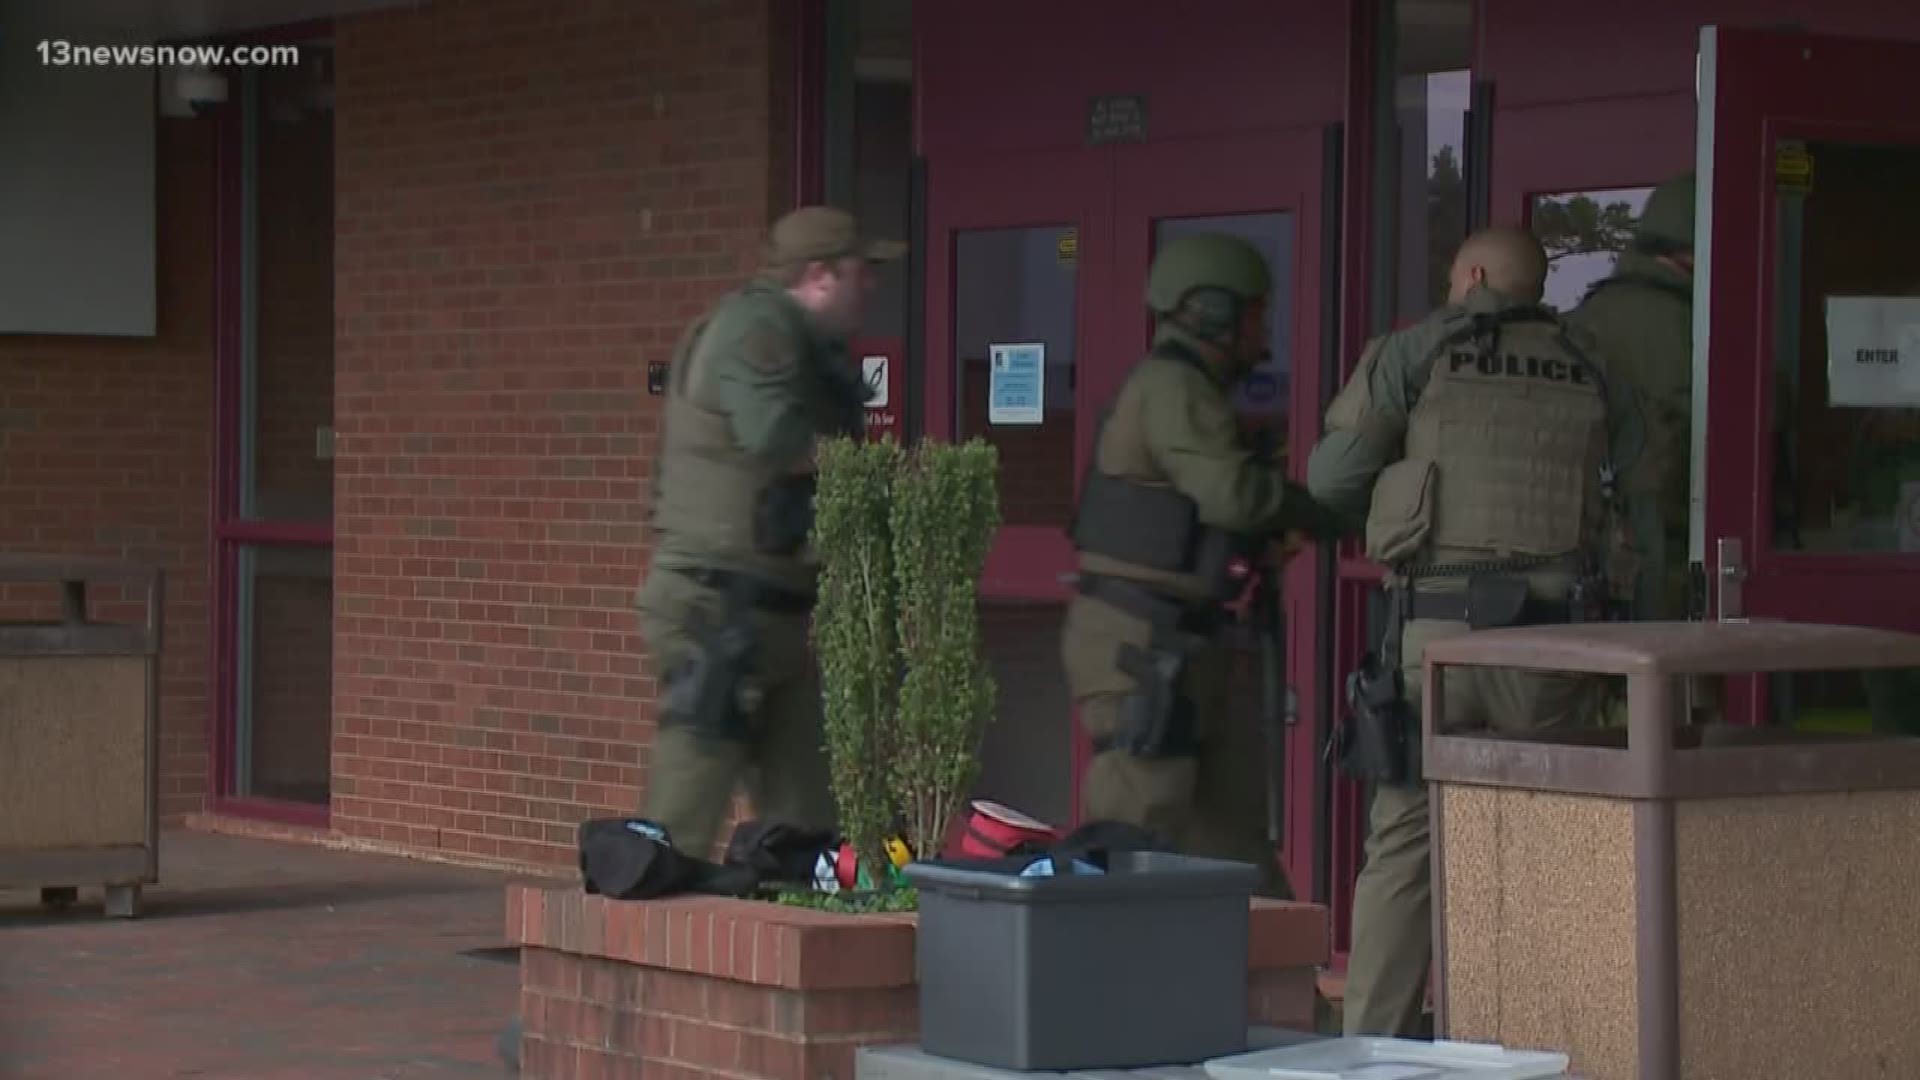 Suffolk police, firefighters, sheriff's deputies and school leaders took part in an active shooter drill at a high school.